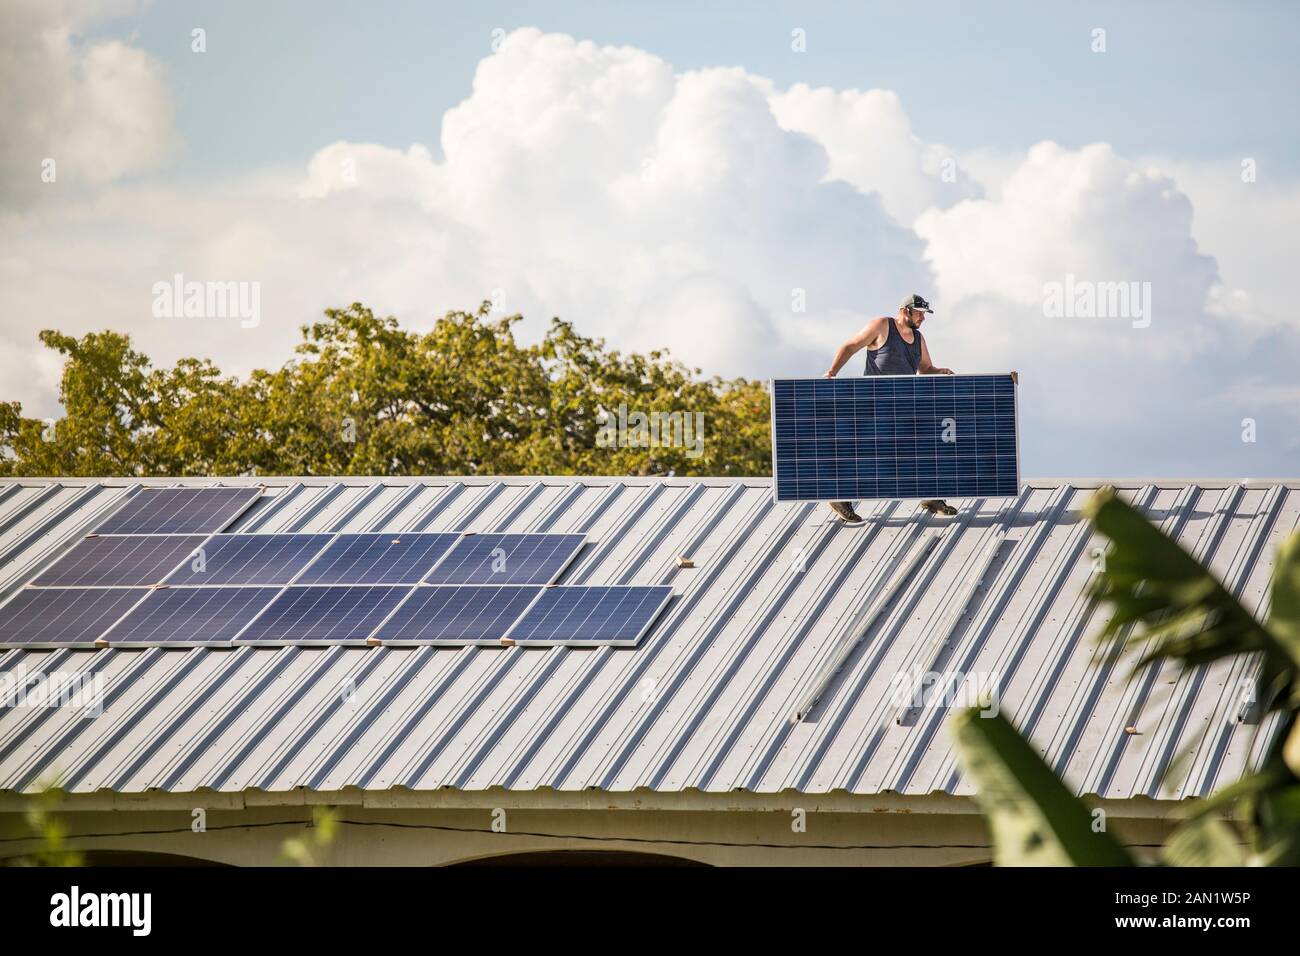 Construction worker carries solar panel across roof during install. Stock Photo